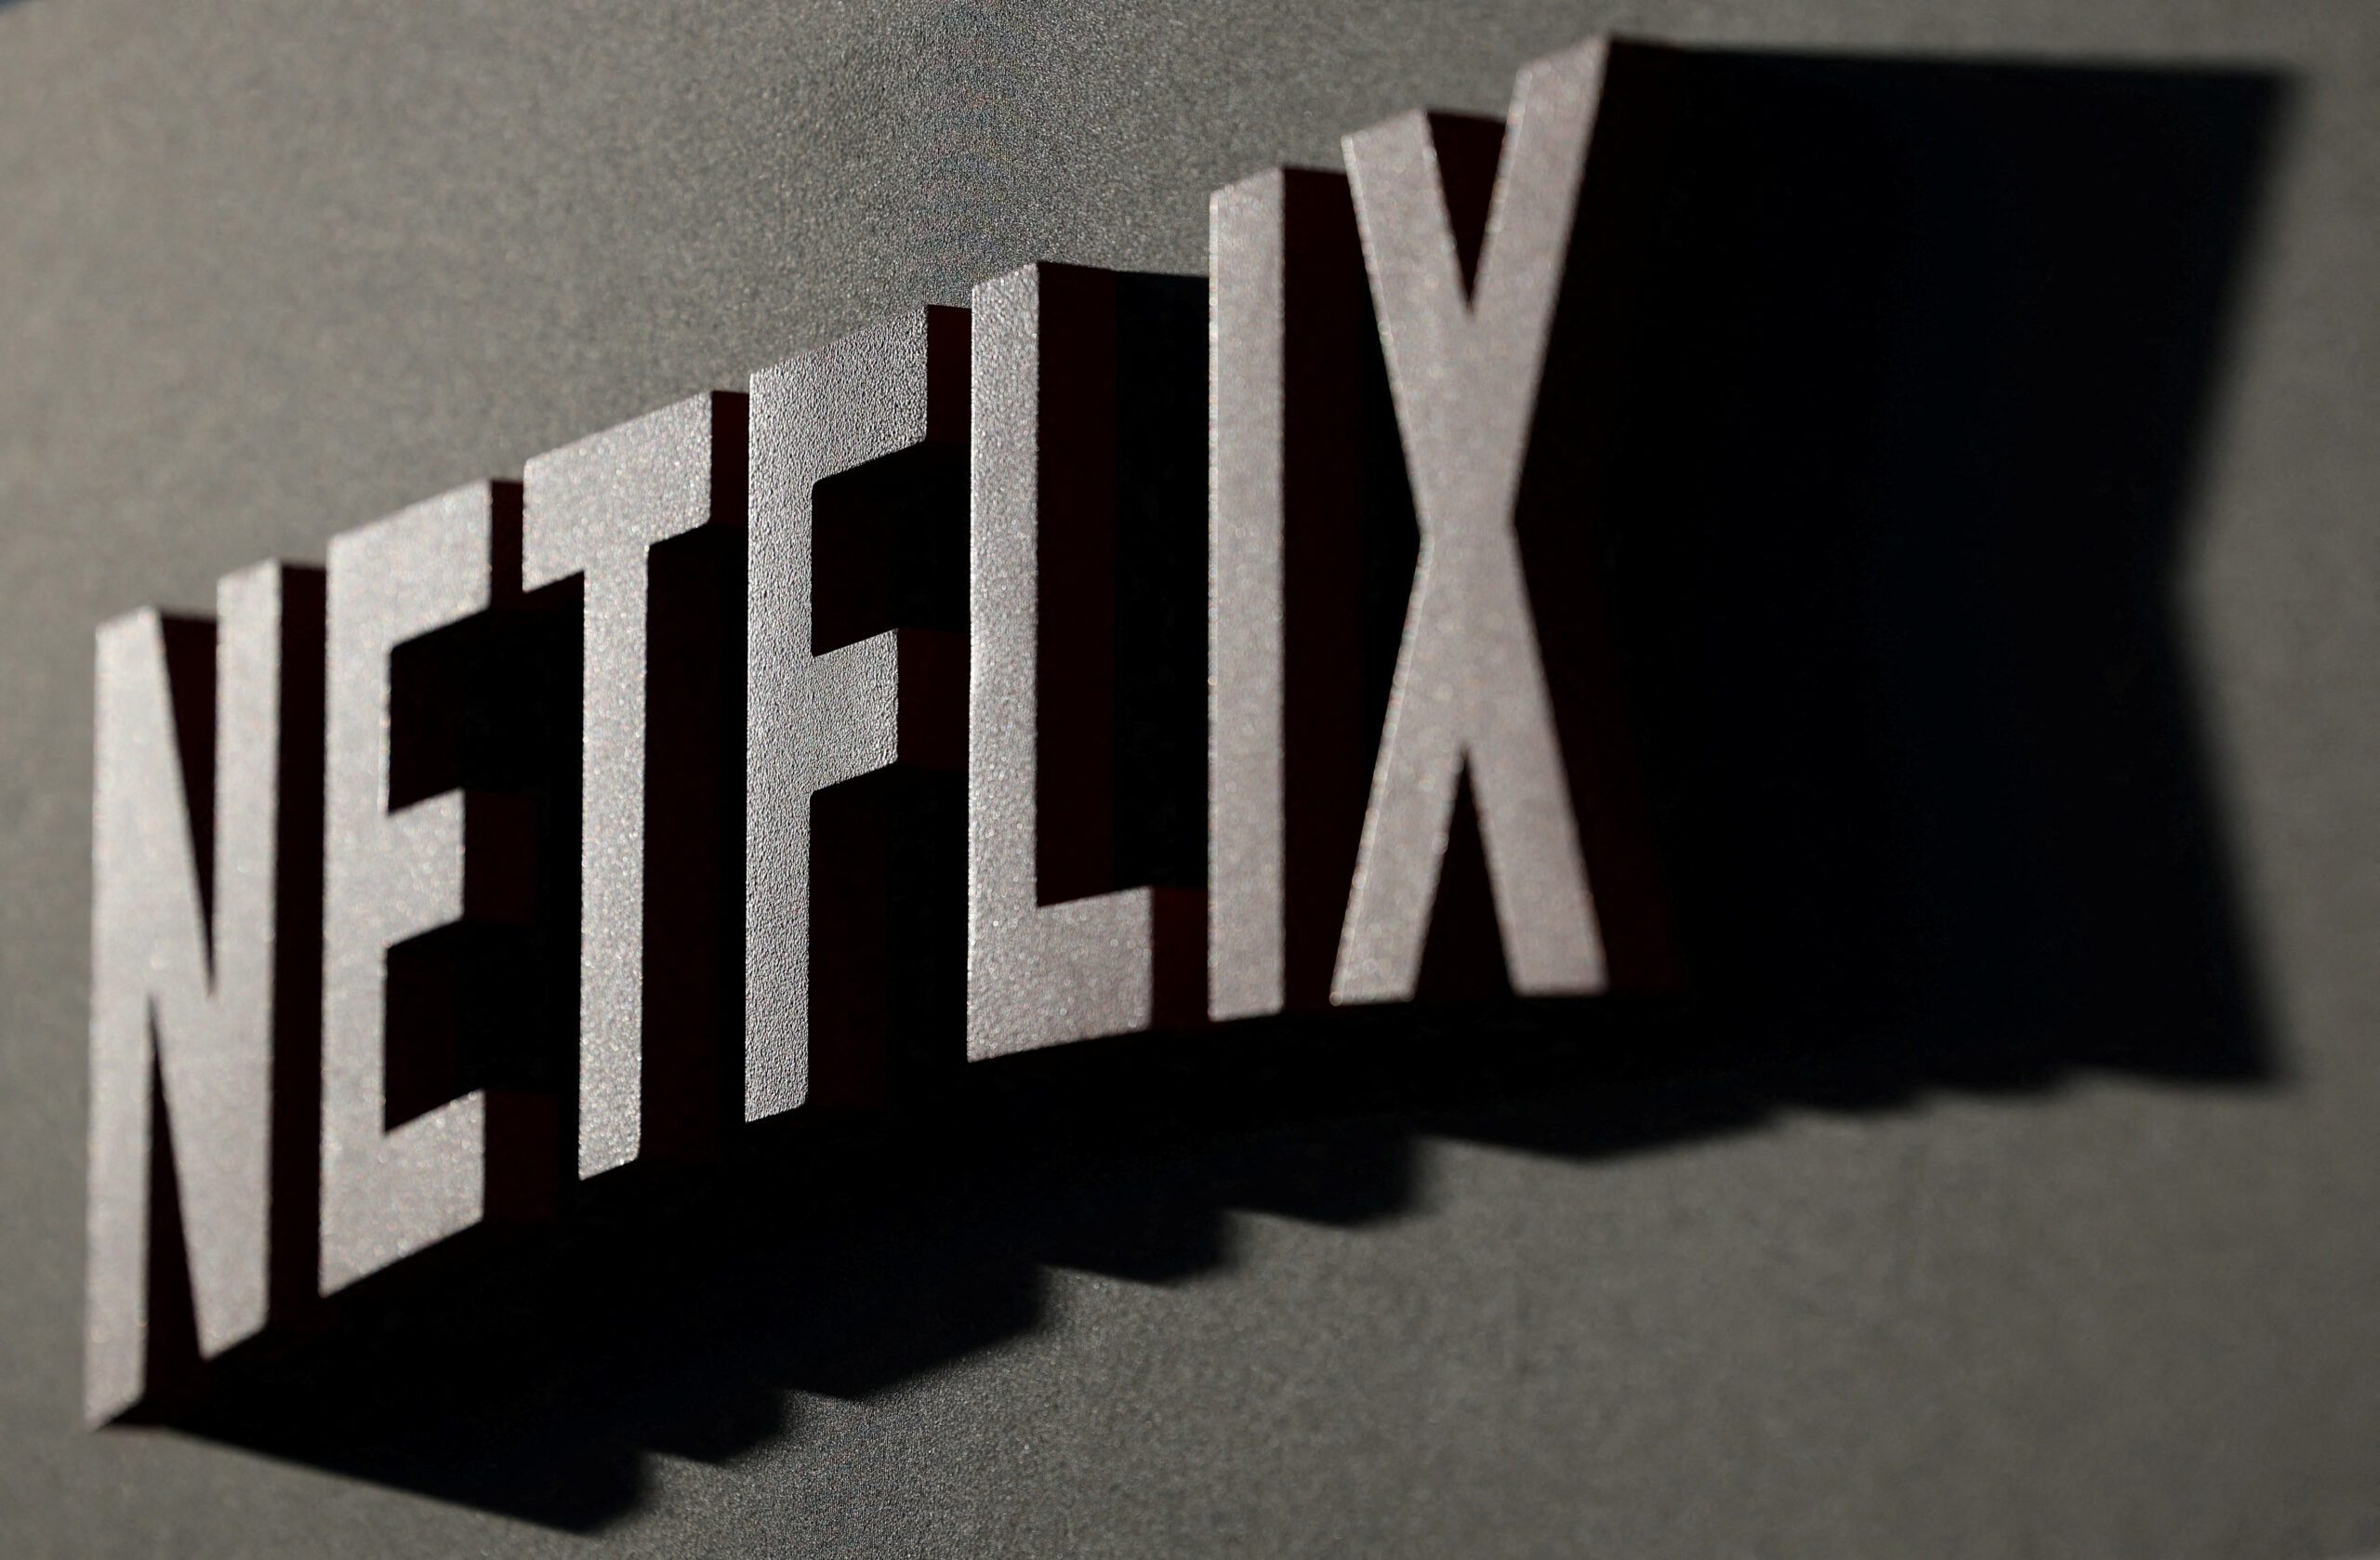 Netflix loses more than 1M subscribers in Spain after password sharing crackdown – study